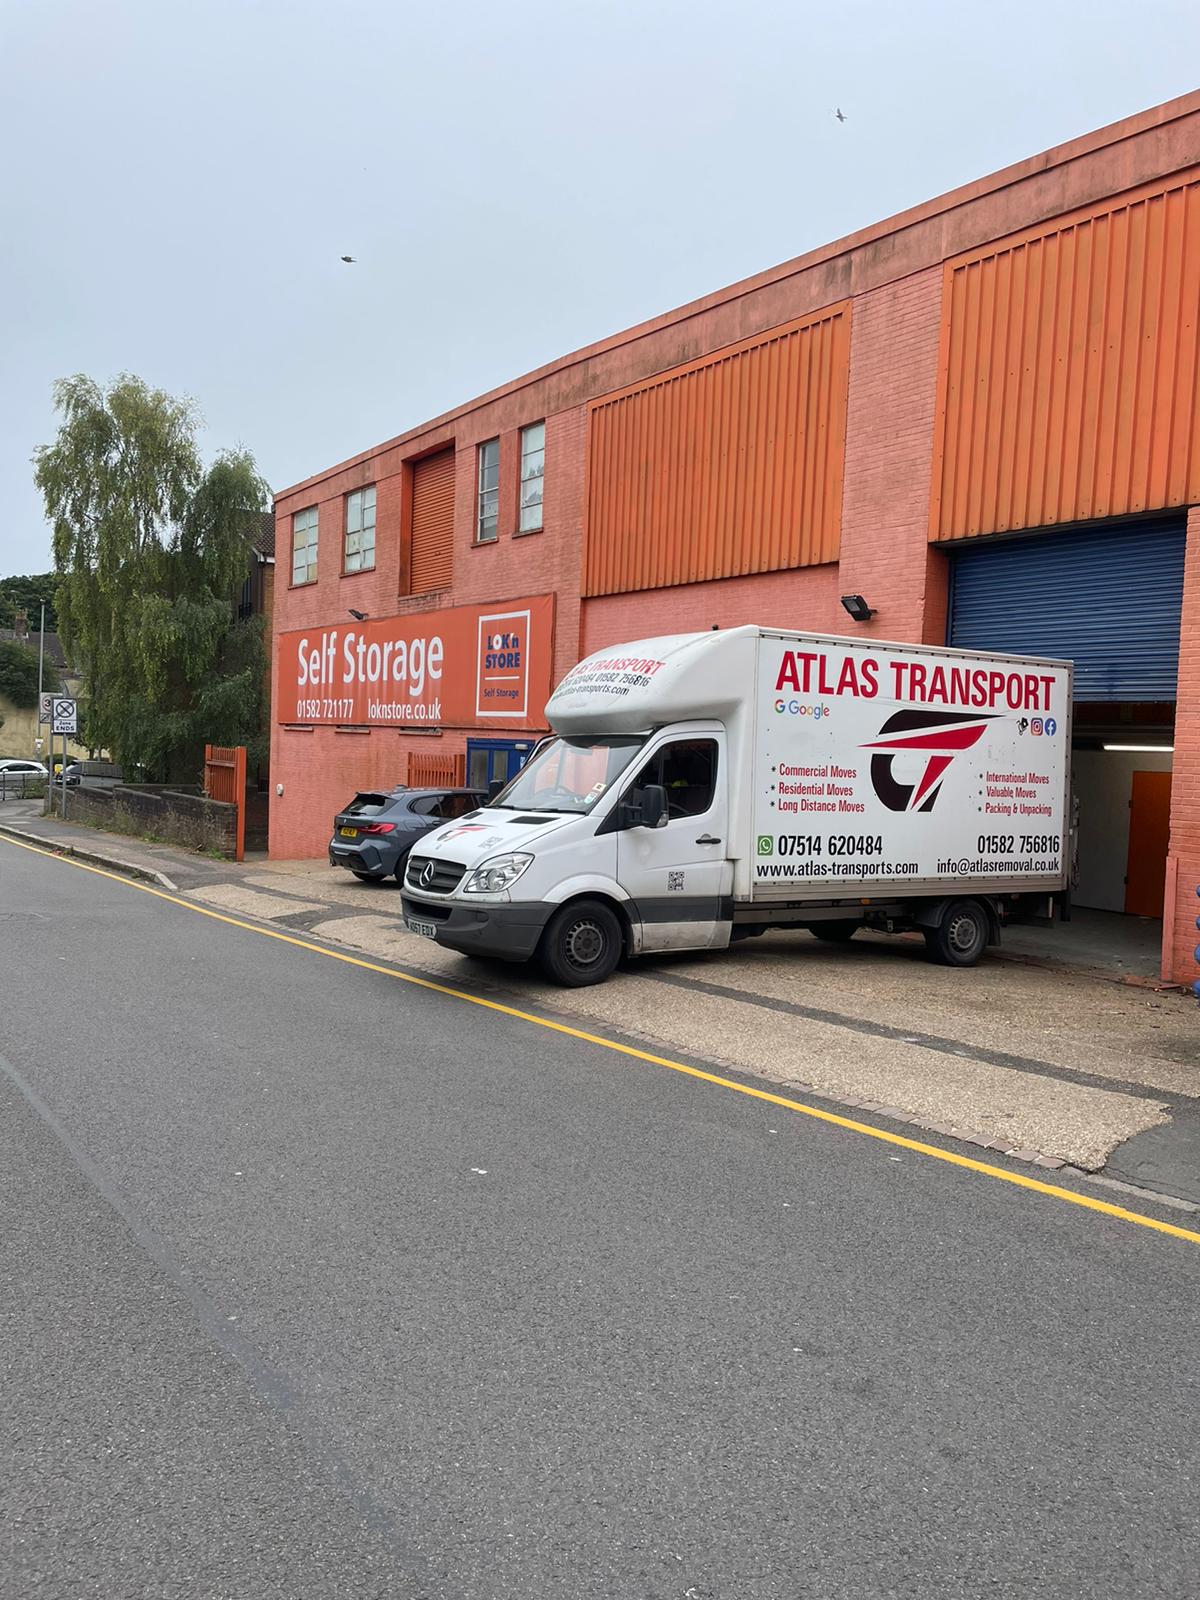 Atlas Transports a well-known man and van Luton UK based company